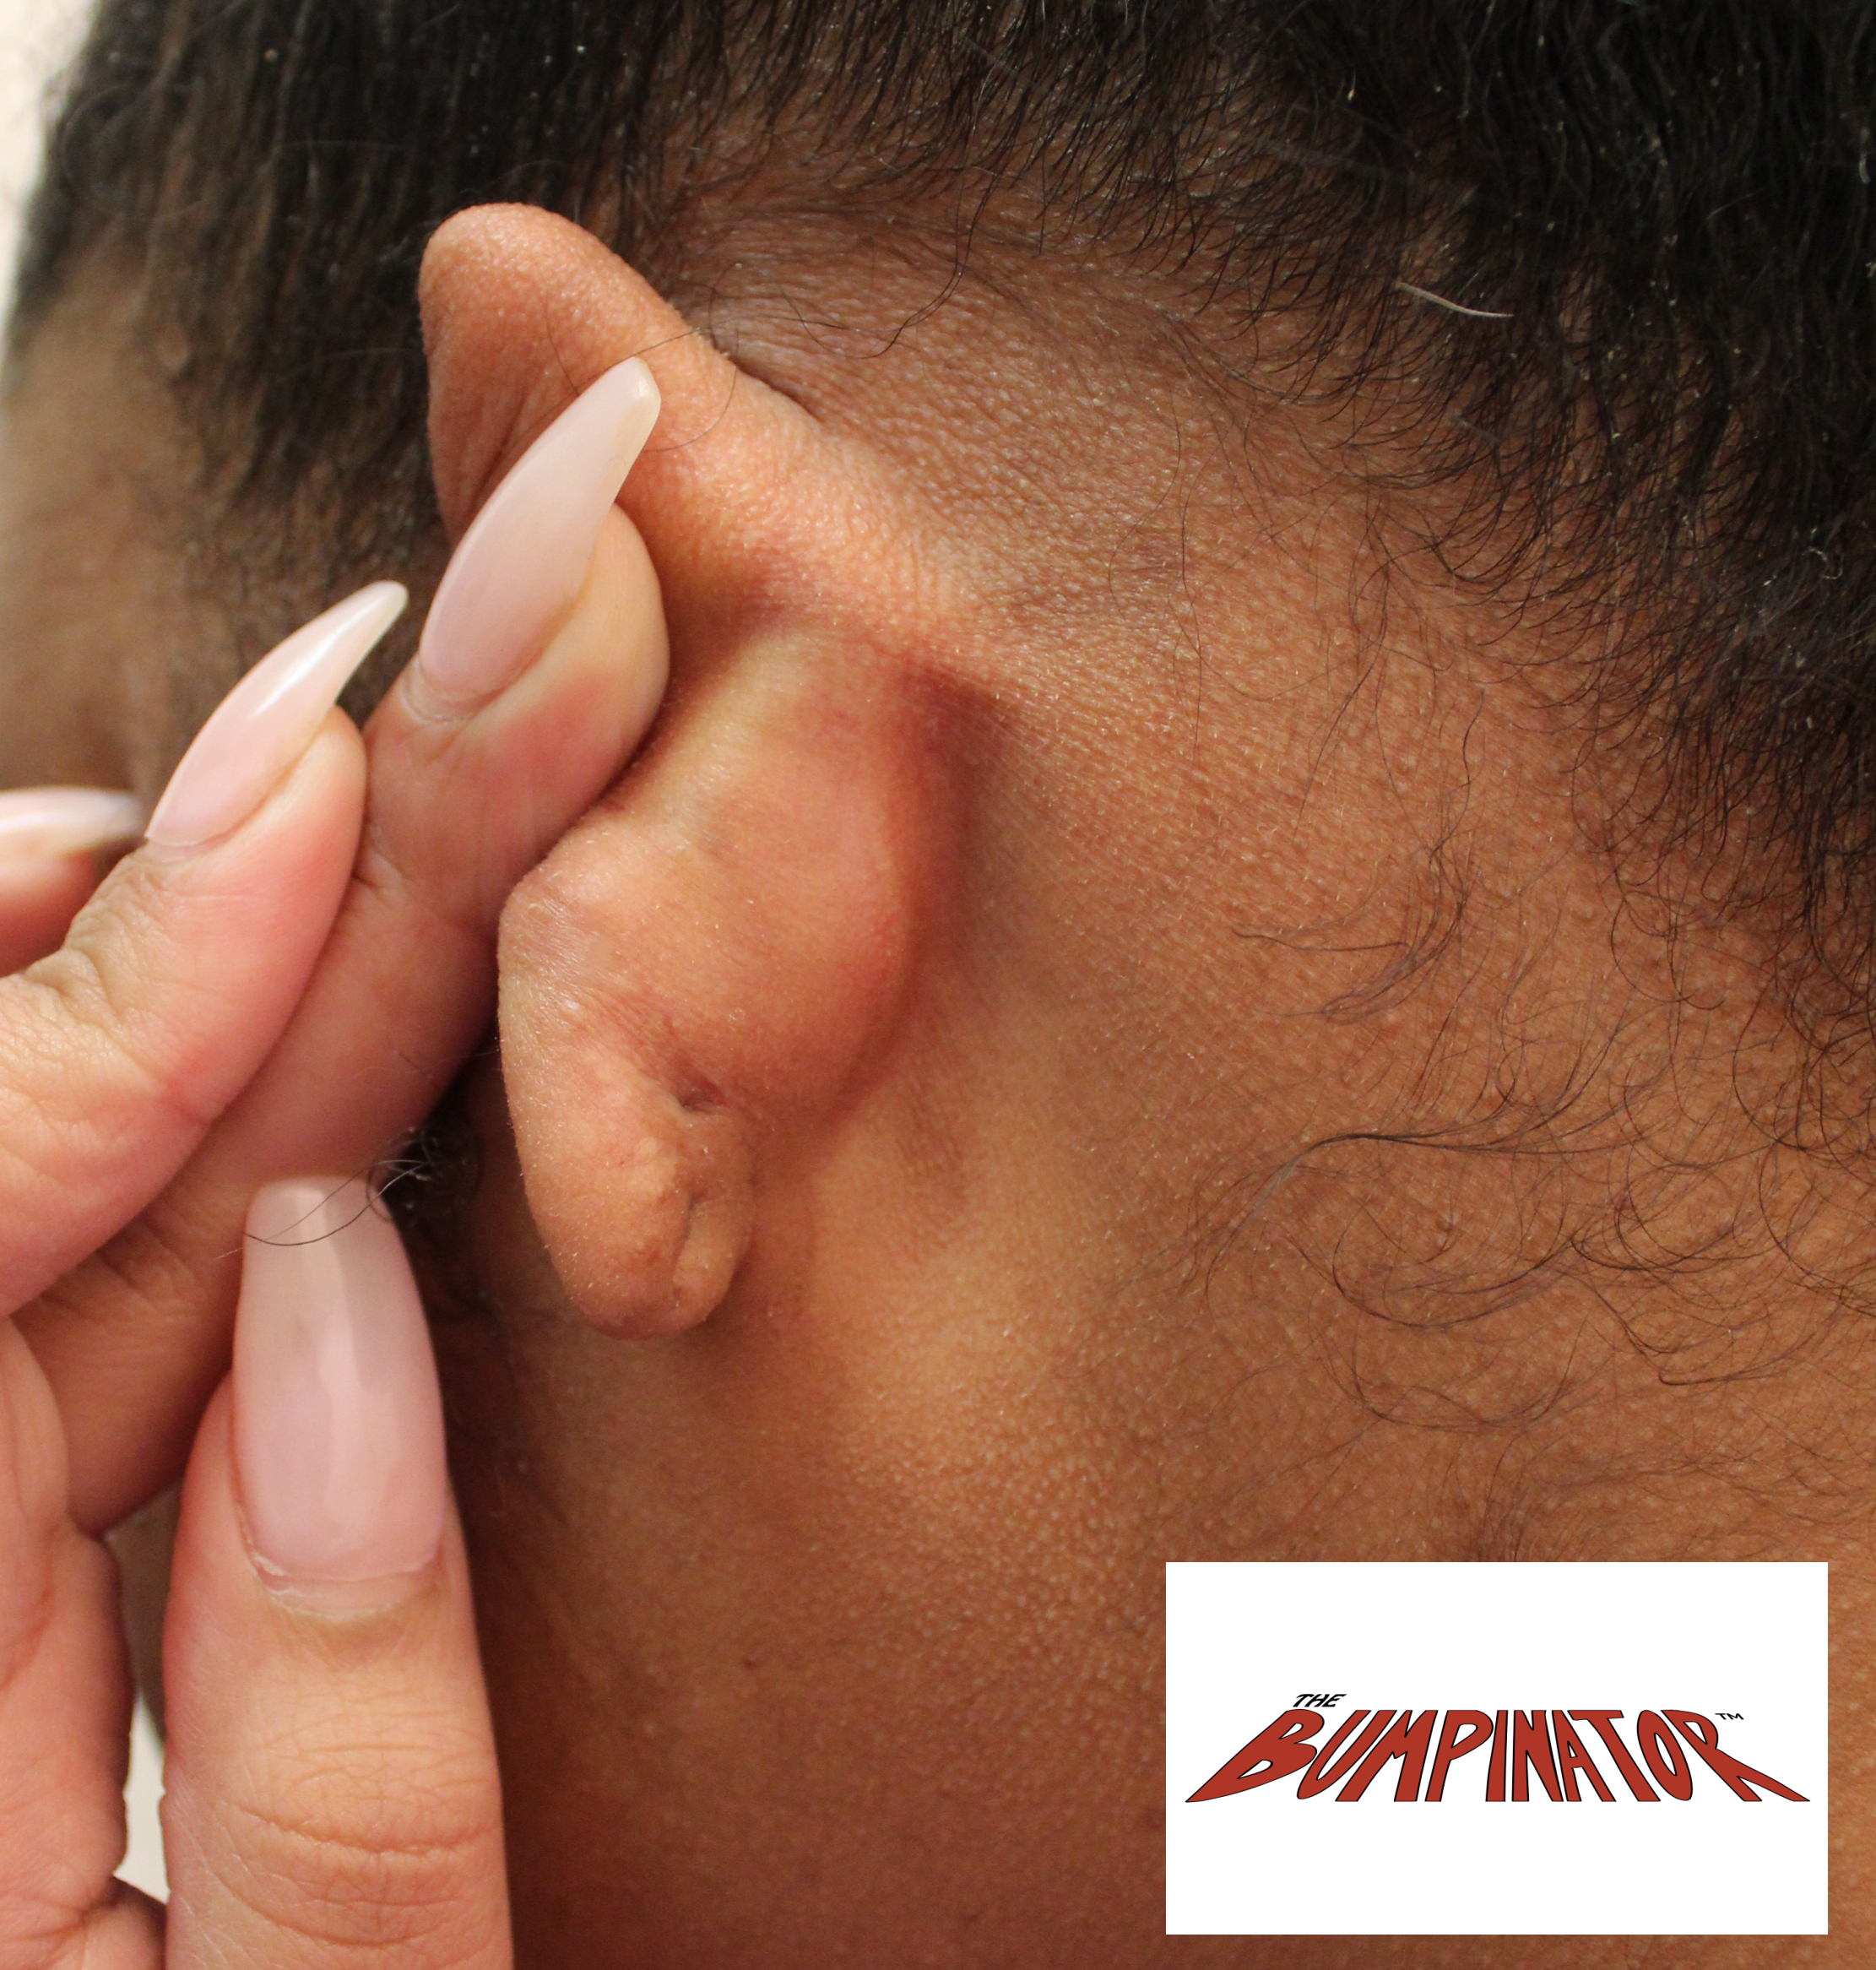 Follow up photo depicts the back view of patient's left ear which has been restored in an excellent fashion